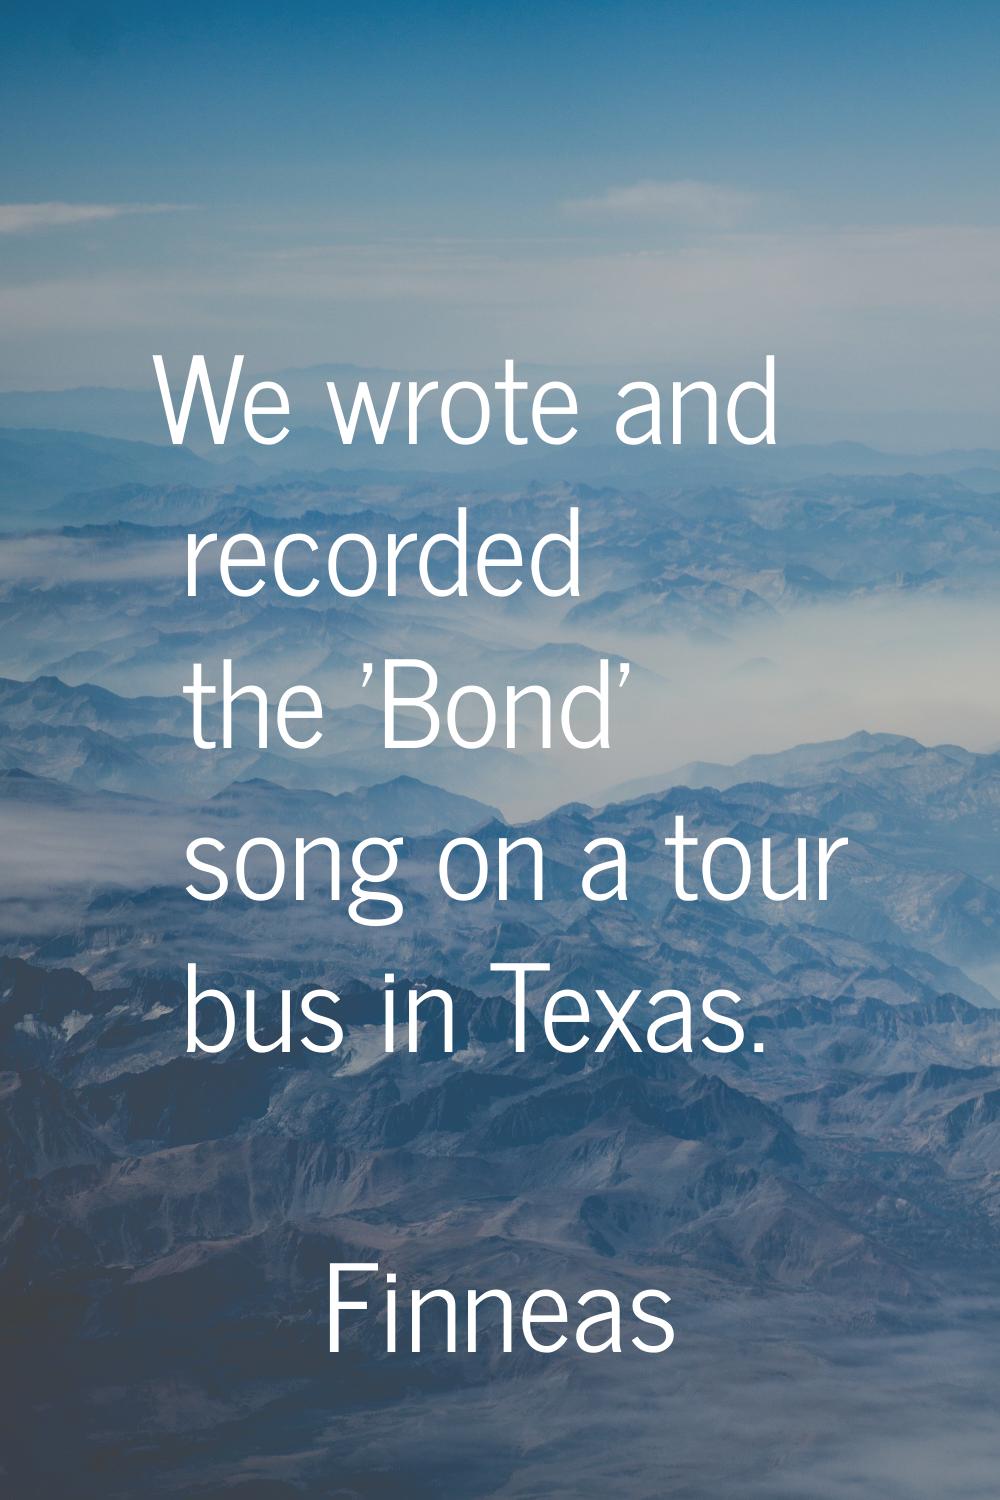 We wrote and recorded the 'Bond' song on a tour bus in Texas.